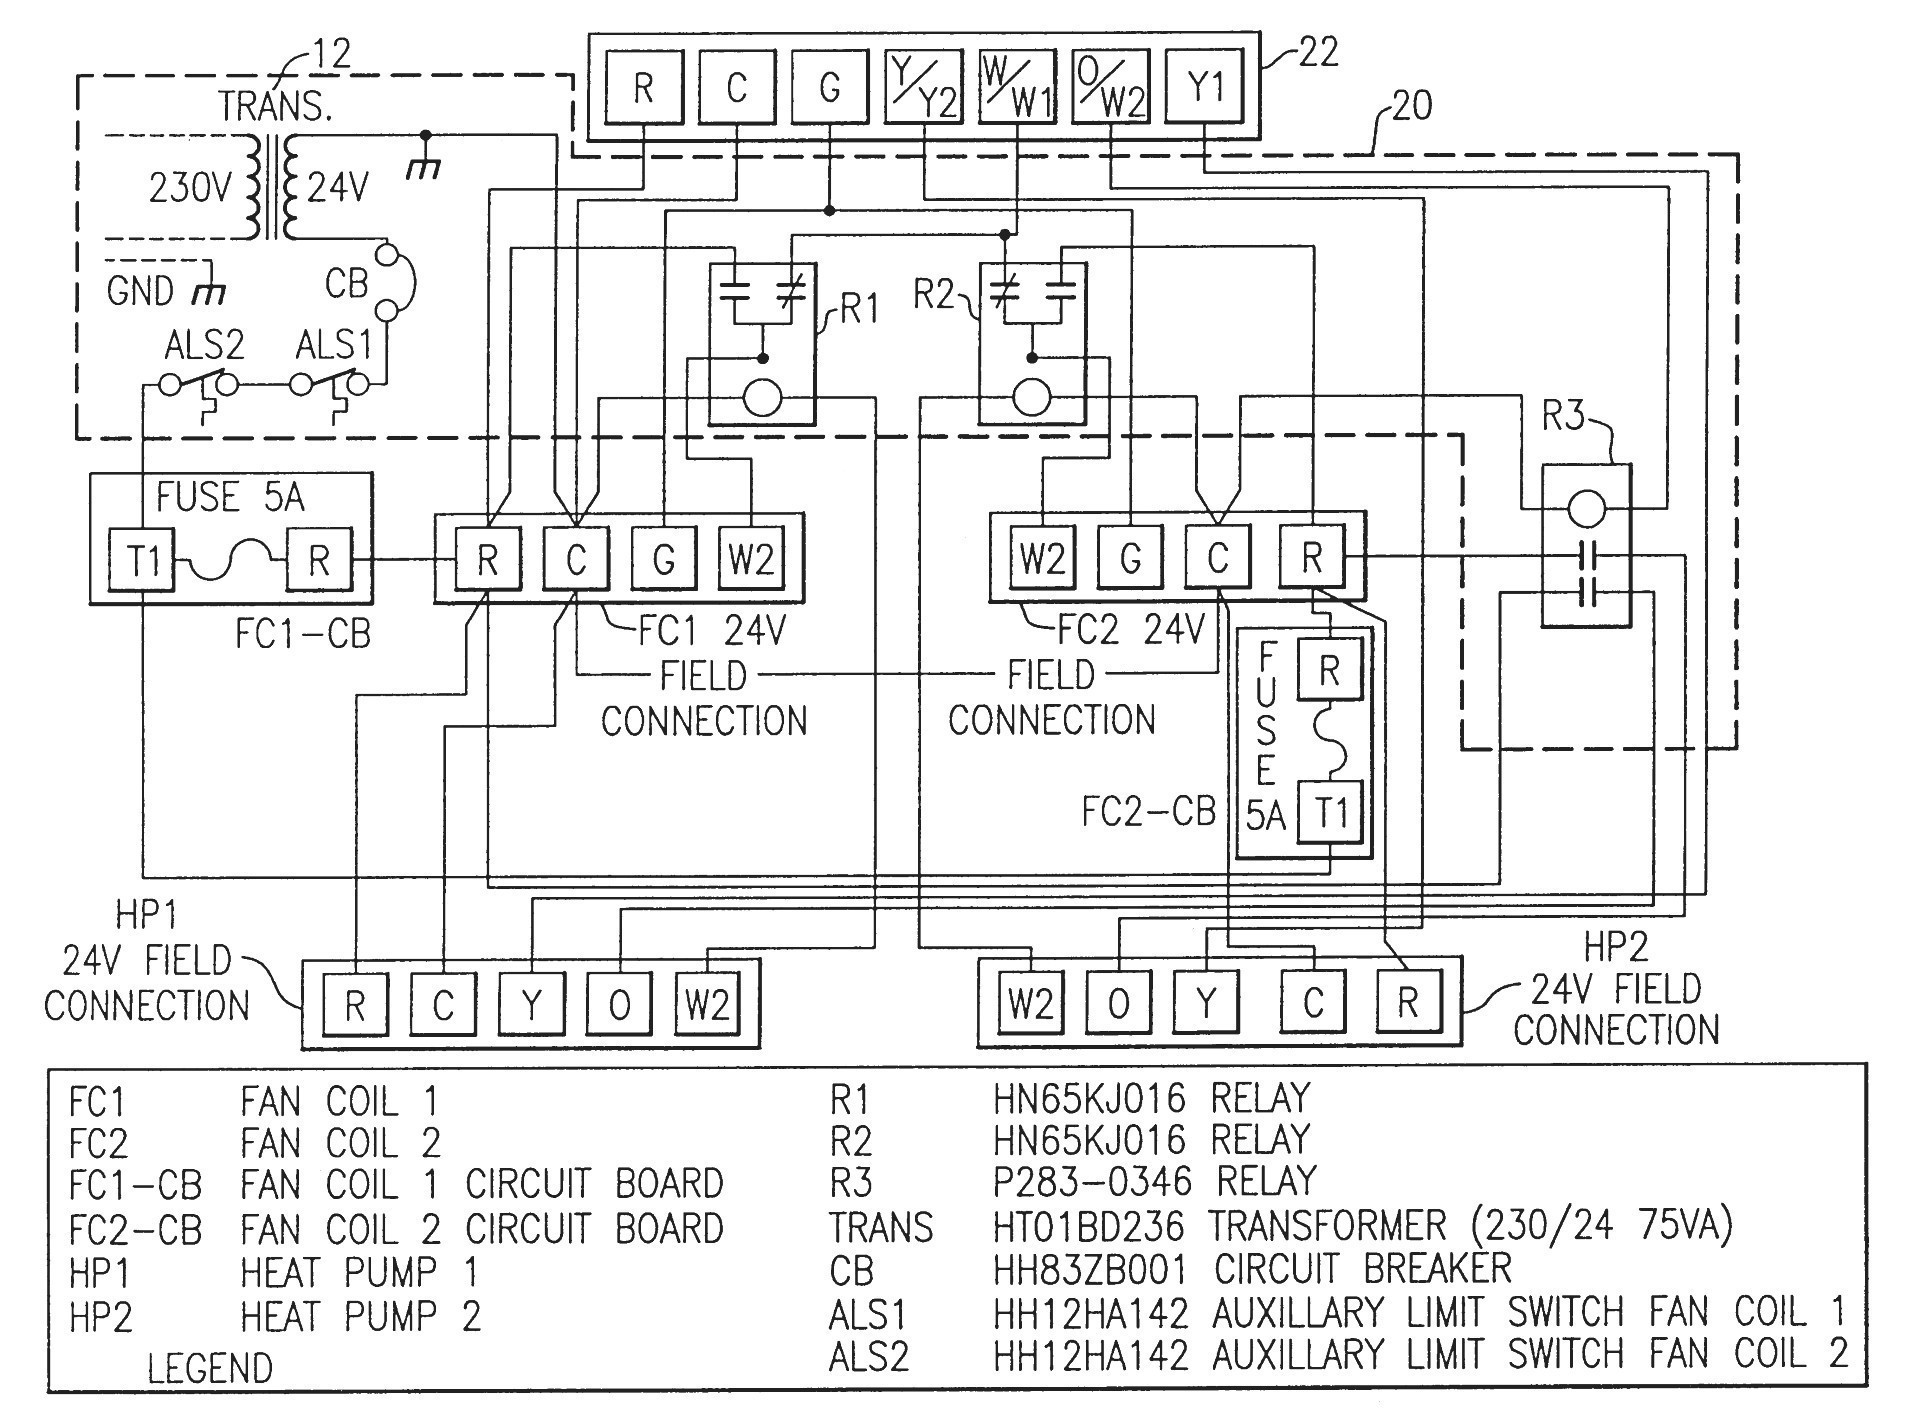 First pany Air Handler Wiring Diagram Unique Thermostat Wiring Diagram New Rheem Air Handler Schematic Showy Ruud